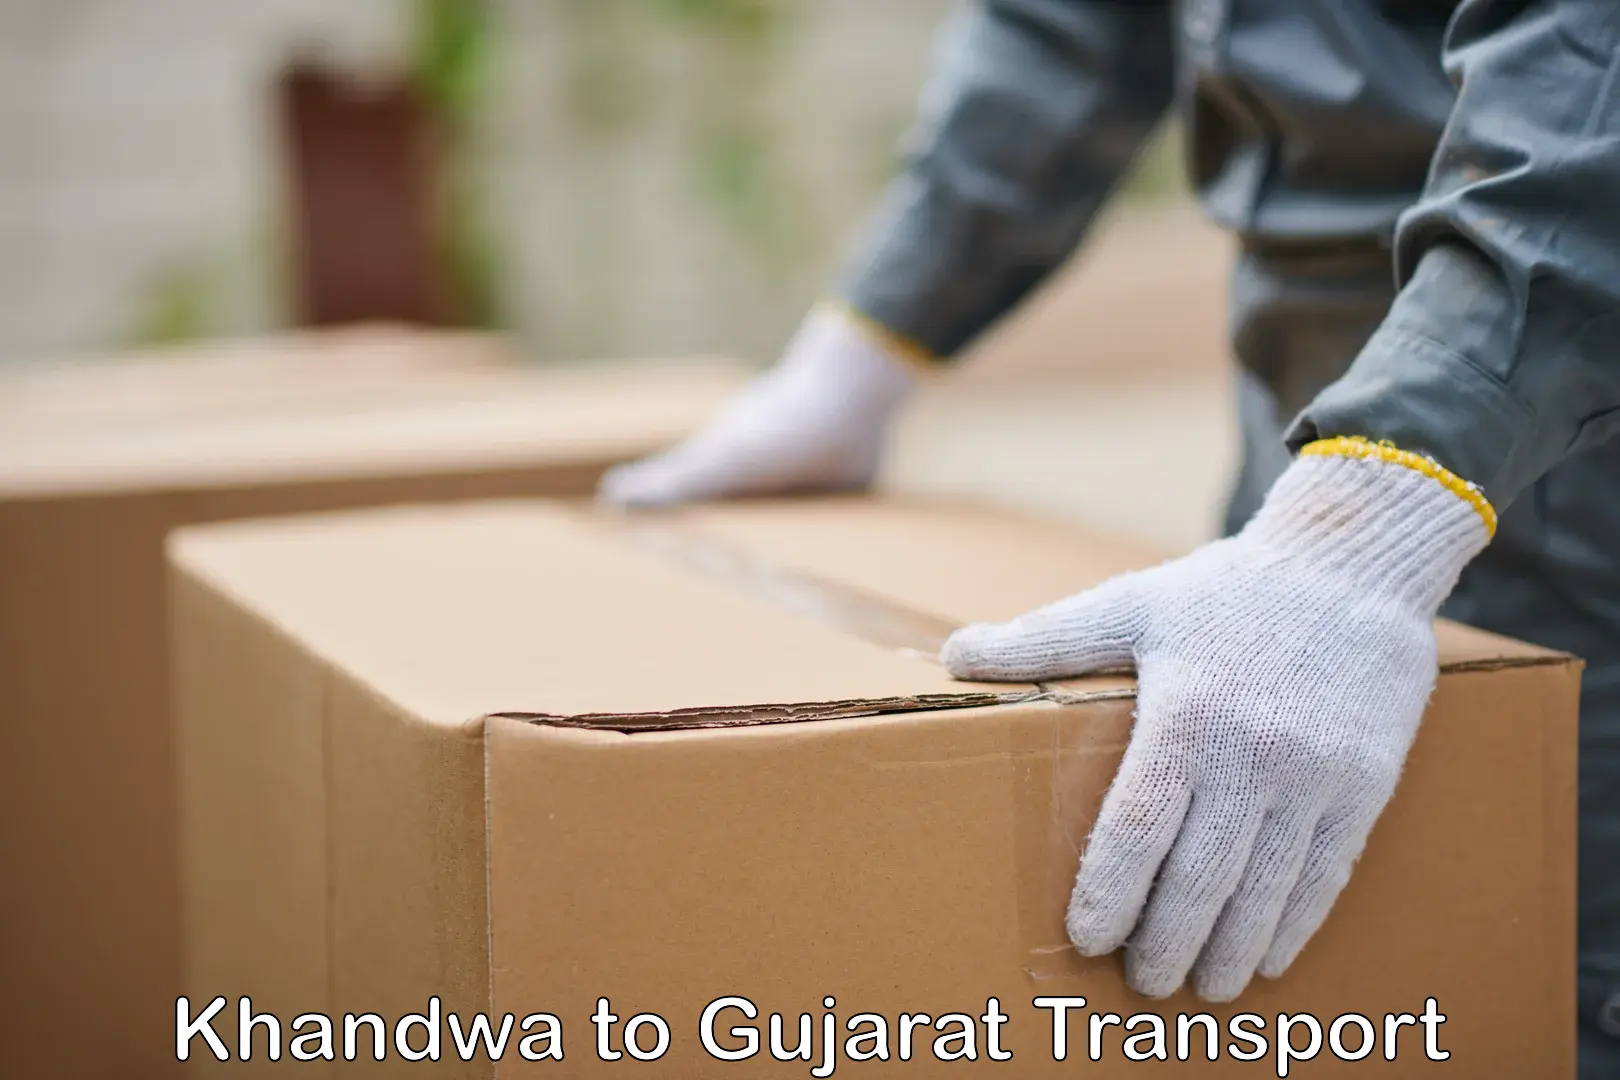 Express transport services Khandwa to Veraval